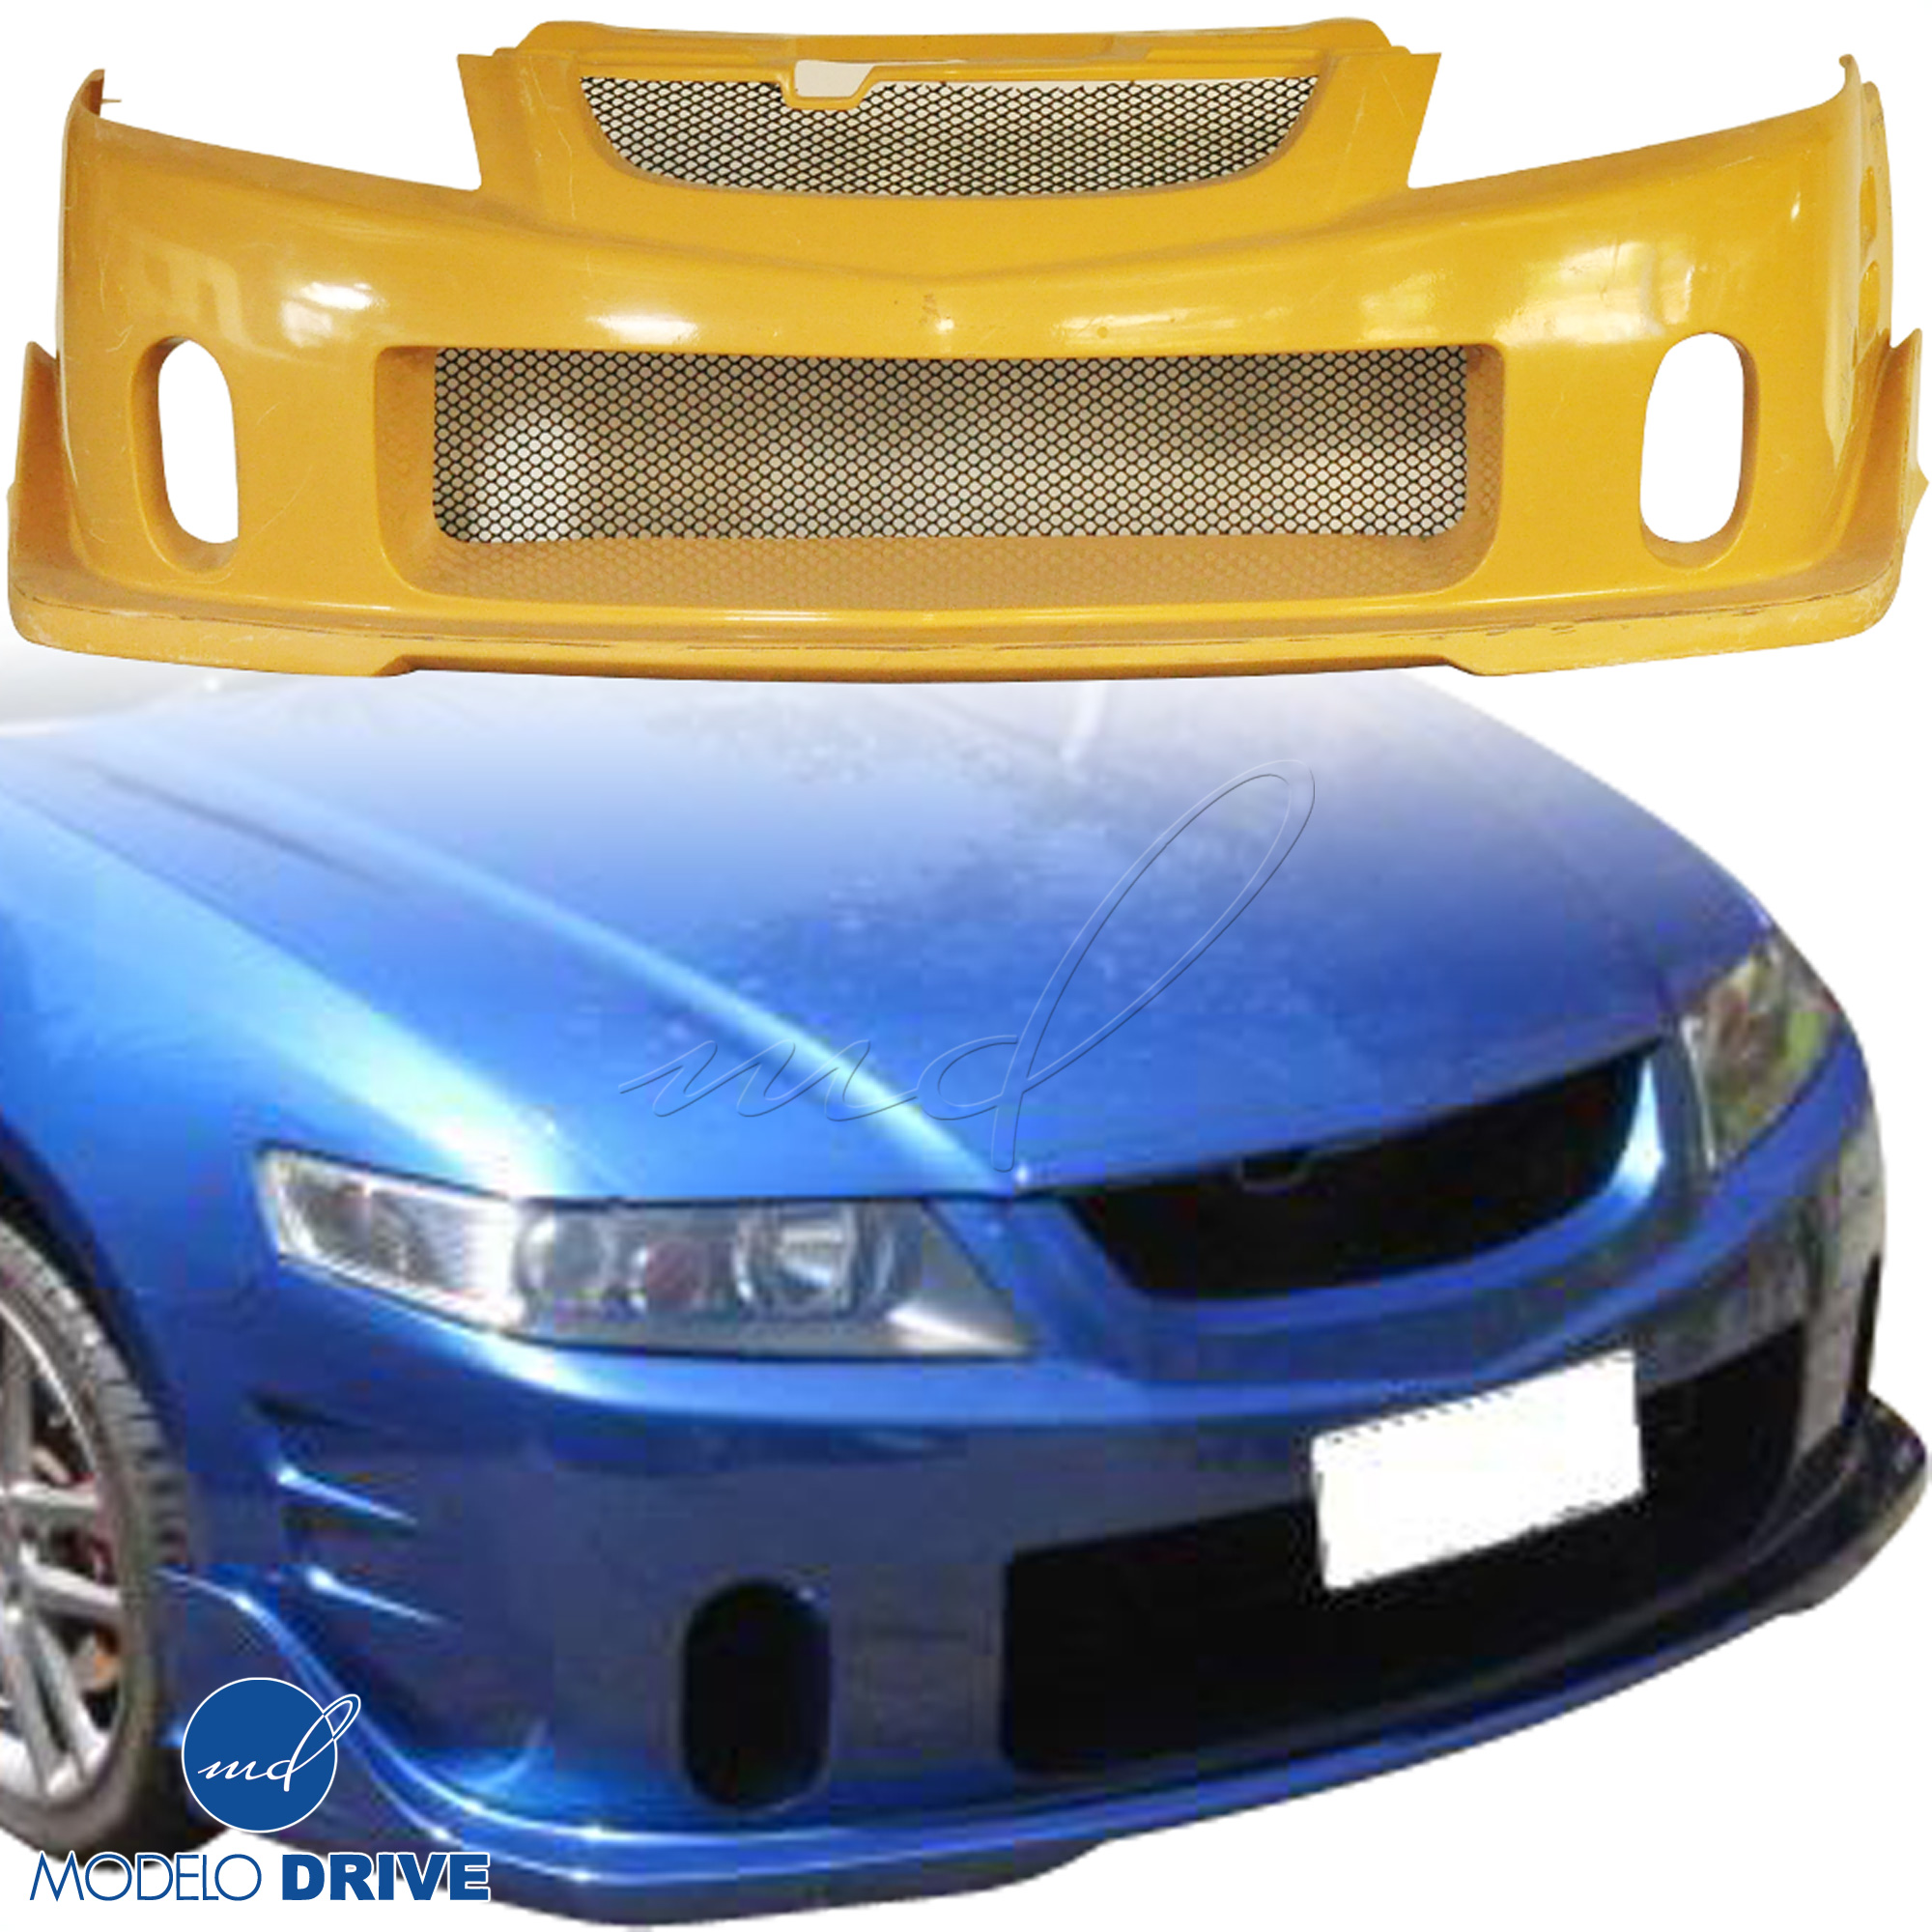 ModeloDrive FRP BC2 Front Bumper > Acura TSX CL9 2004-2008 - Image 12